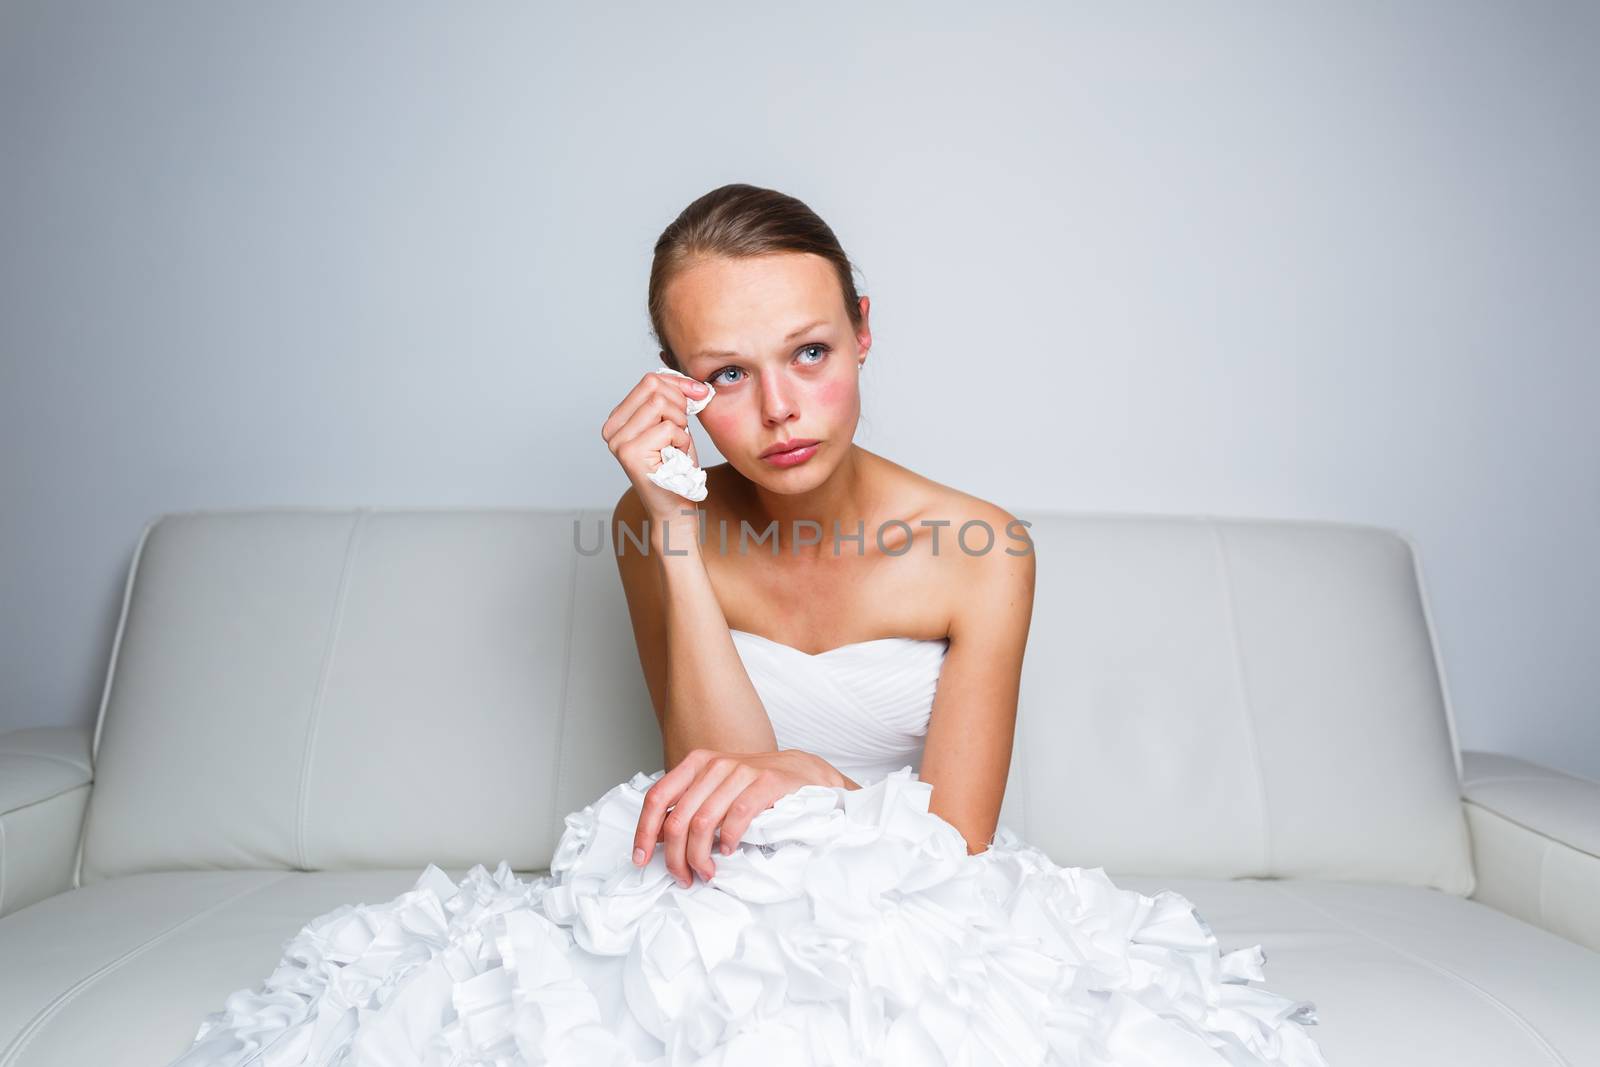 Sad bride crying, smitten, feeling low and depressed